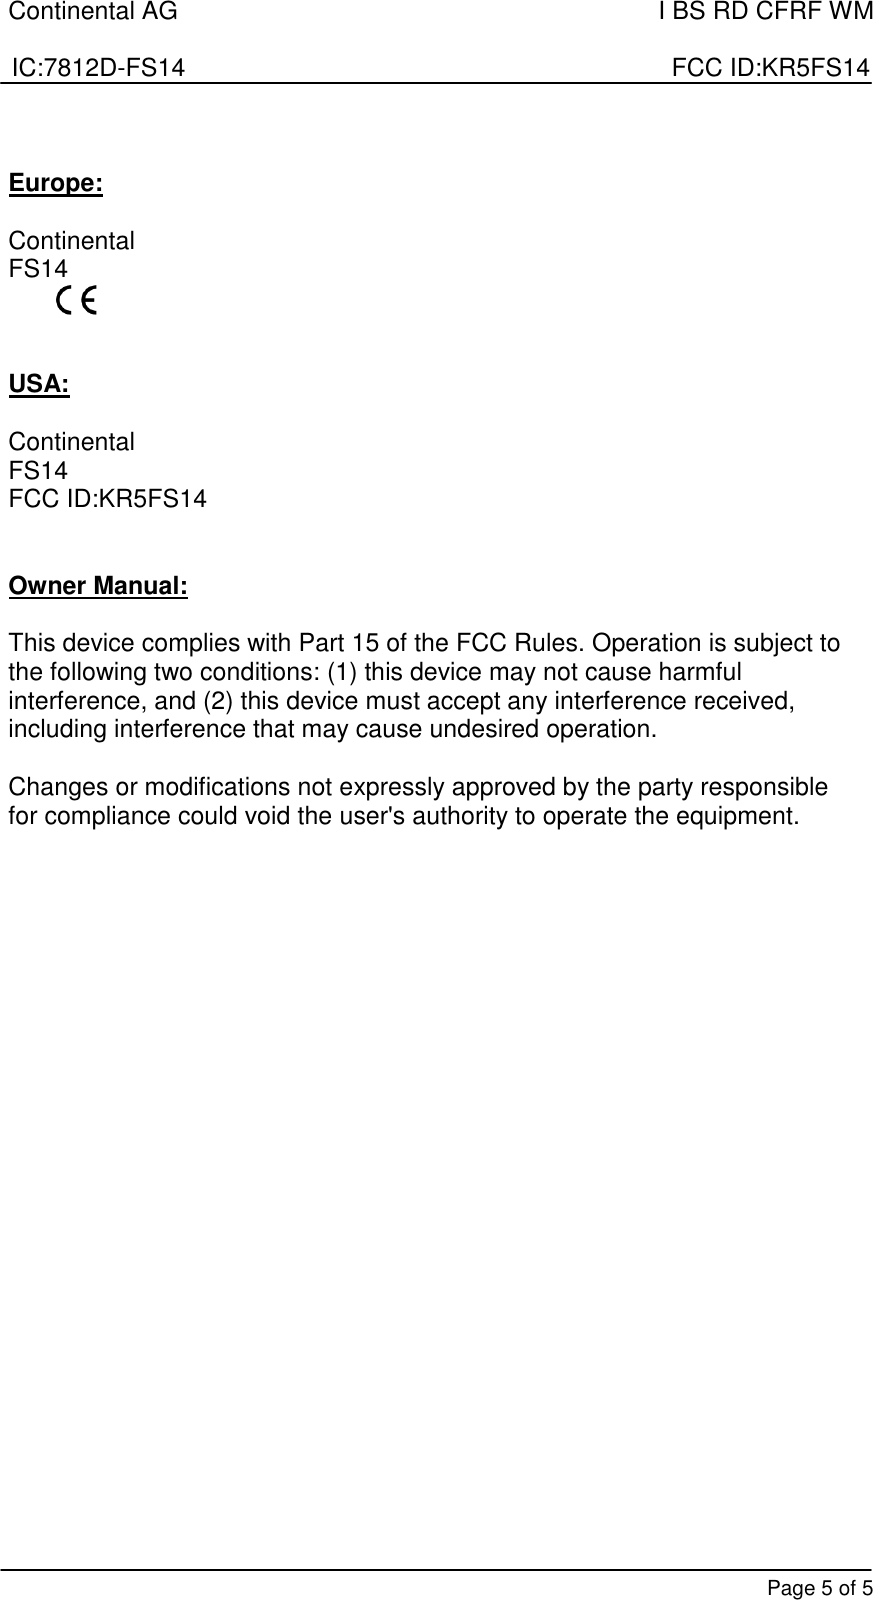 Continental AG    I BS RD CFRF WM  IC:7812D-FS14                                                                      FCC ID:KR5FS14       Page 5 of 5  Europe:  Continental       FS14    USA:  Continental       FS14 FCC ID:KR5FS14   Owner Manual:  This device complies with Part 15 of the FCC Rules. Operation is subject to the following two conditions: (1) this device may not cause harmful interference, and (2) this device must accept any interference received, including interference that may cause undesired operation.  Changes or modifications not expressly approved by the party responsible for compliance could void the user&apos;s authority to operate the equipment. 